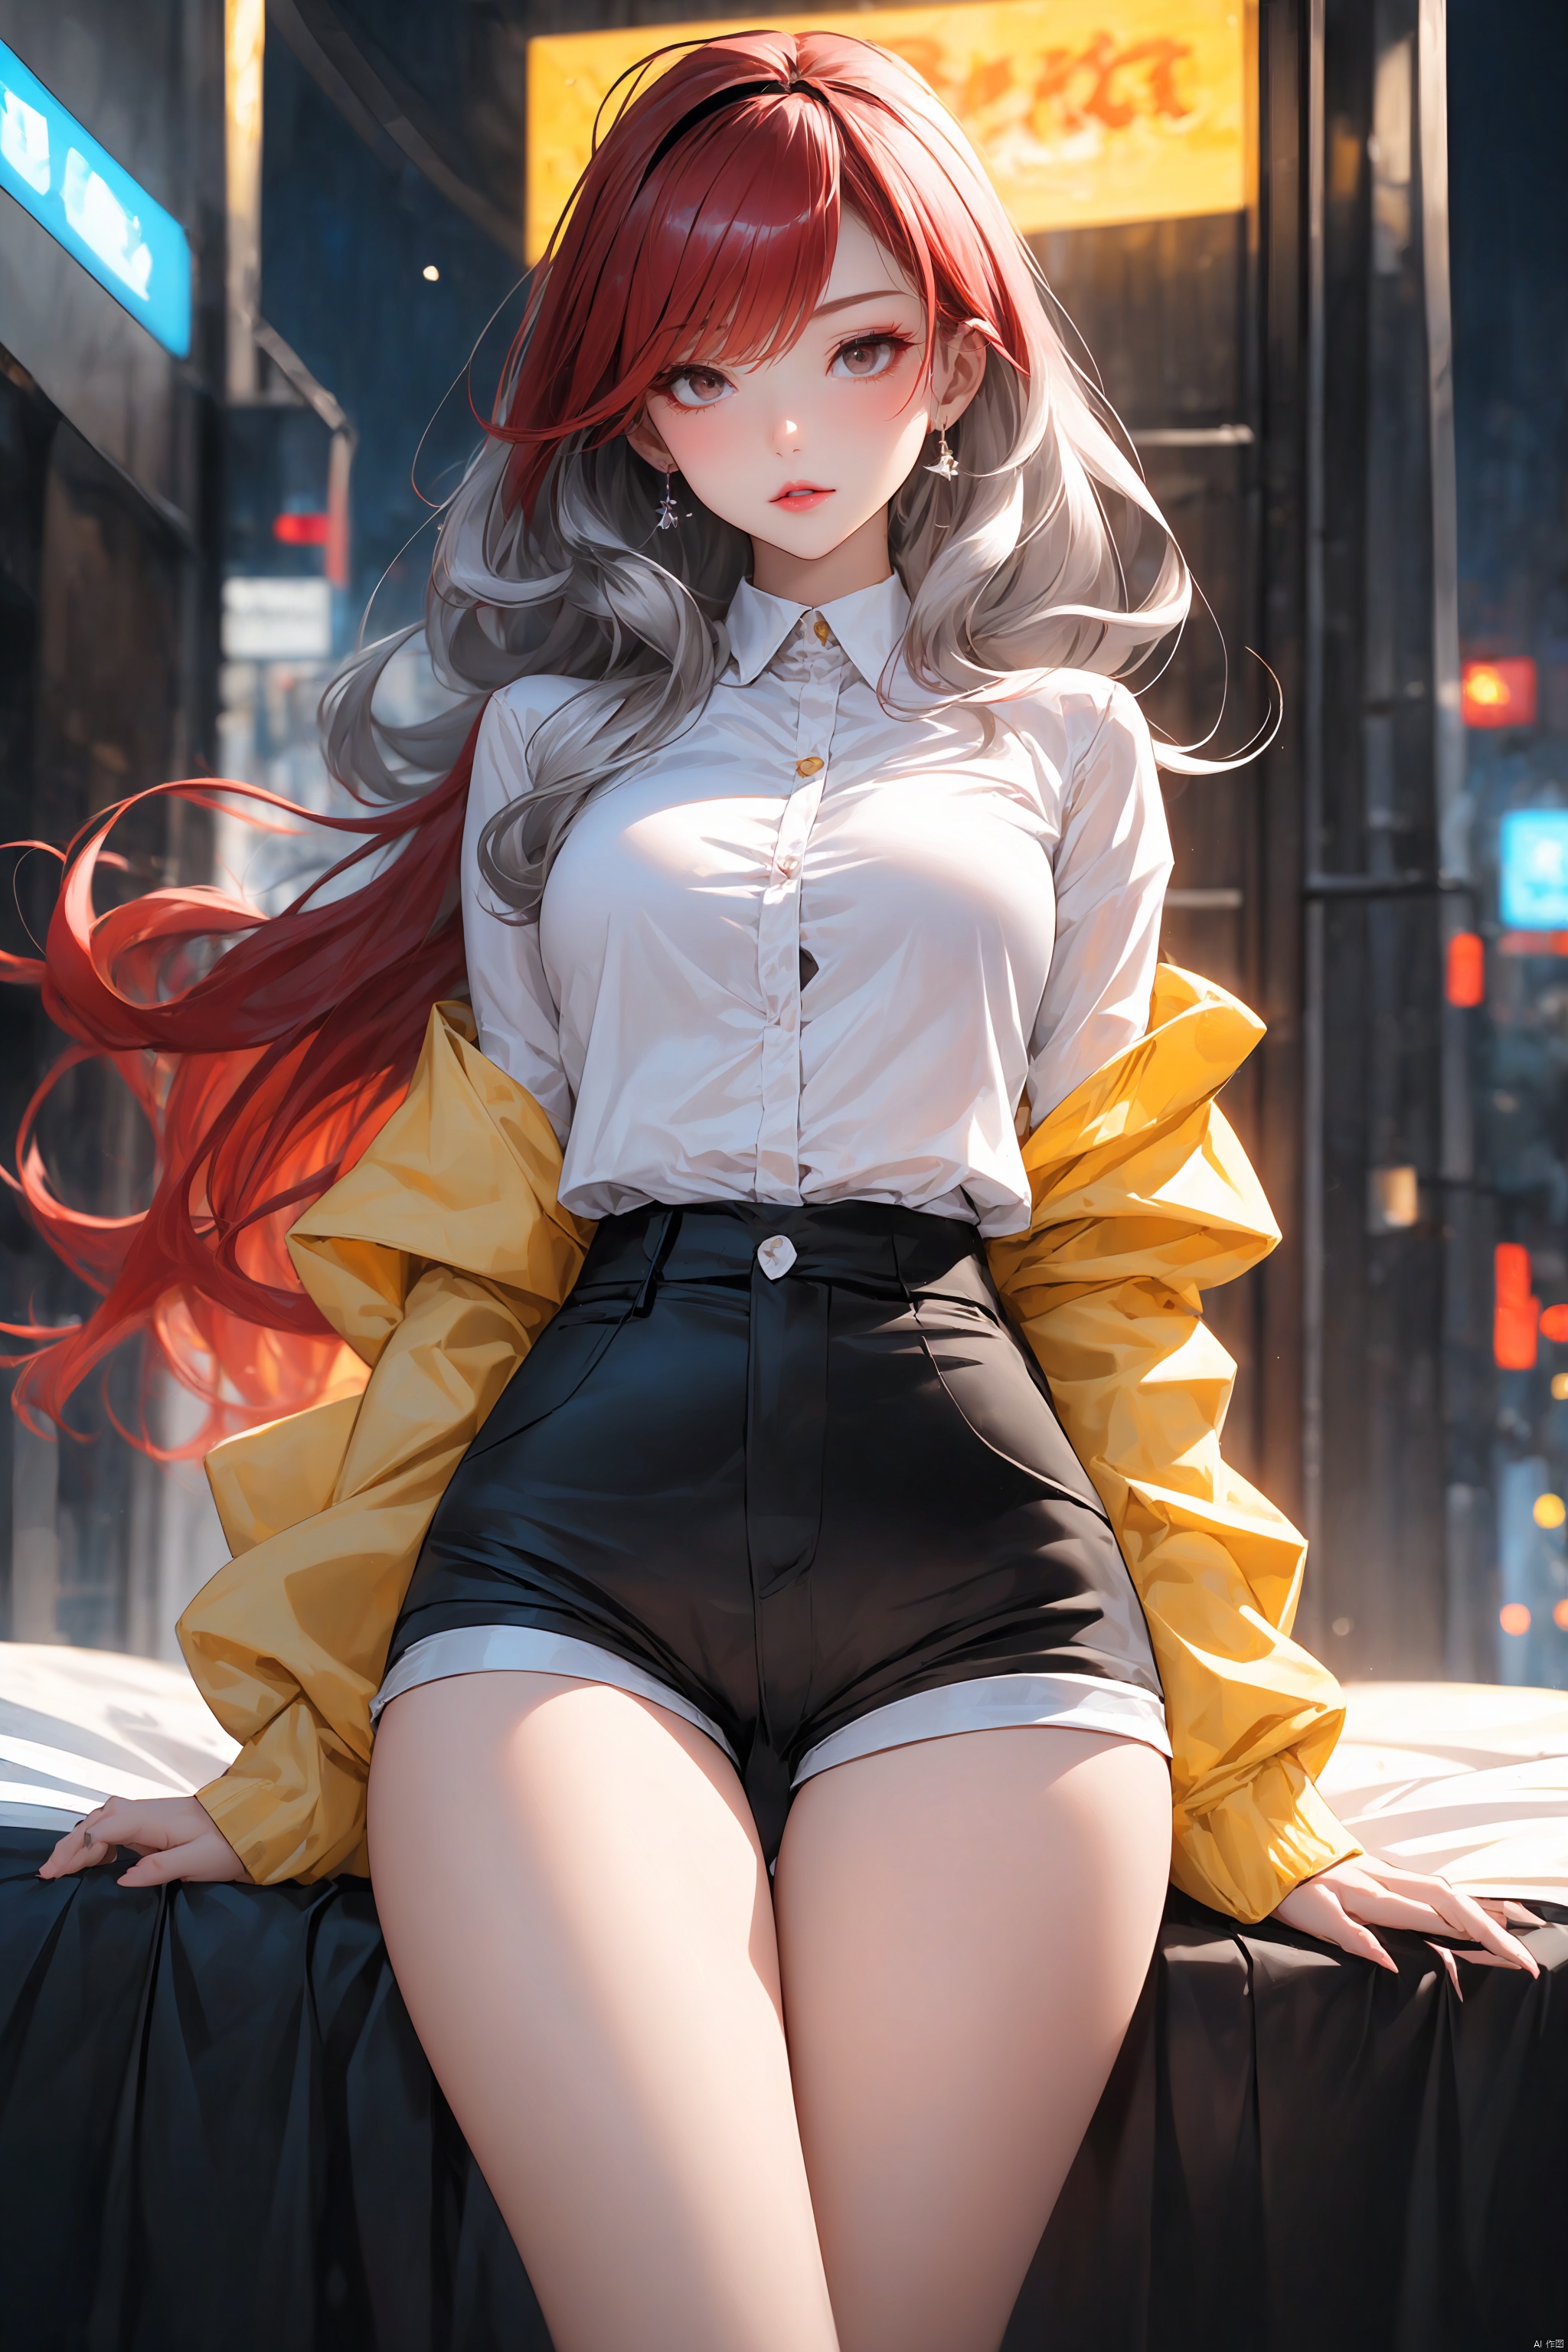  KK-Comic Style, looking at viewer,
bangs,lips, makeup, on bed,
red lips, peach blossom eye, crop_top, 
skirt, night_sky, rooftop, city, 
neon lights, highly detailed, 
ultra-high resolutions, 32K UHD,
best quality, masterpiece,
partiallysubmerged, flower, airbubble, ((poakl))

1girl\((bishoujo), (lovely face:1.4), (pure red hair:1.4), (black eyes:1.3), (papaya-shaped breasts:1.1), curly_hair, long_hair, (hair_past_waist:1.4), plump_*****, long_legs, sharp_eyelid, black eyeliner, black eyelashes, red eyeshadow, 
(perfect detailed face), (pink lipgloss:1.3), (perfect hands)\),
golden Ultra-thin transparent, (silver Ultra-thin transparent mech:1.3), (all golden color scheme:1.4), 

(short shorts:1.4),